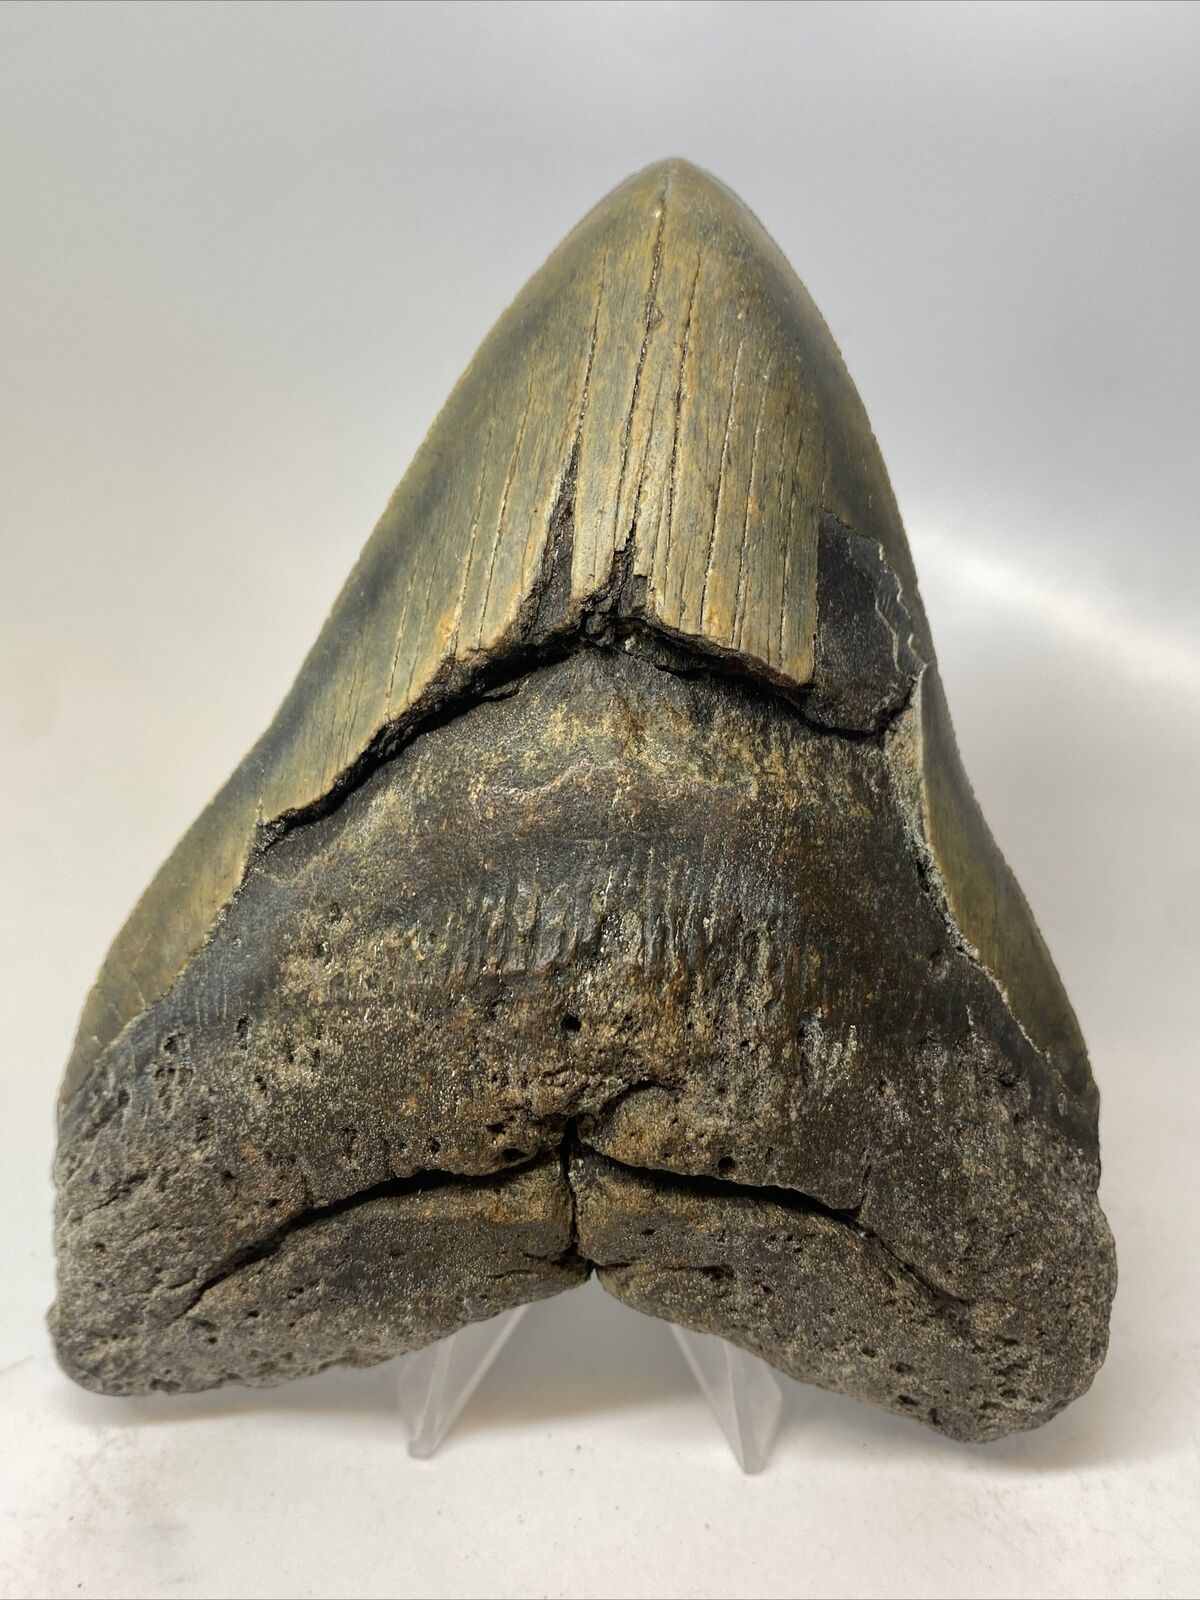 Megalodon Shark Tooth 5.81” Giant - Authentic Fossil - Natural 15380